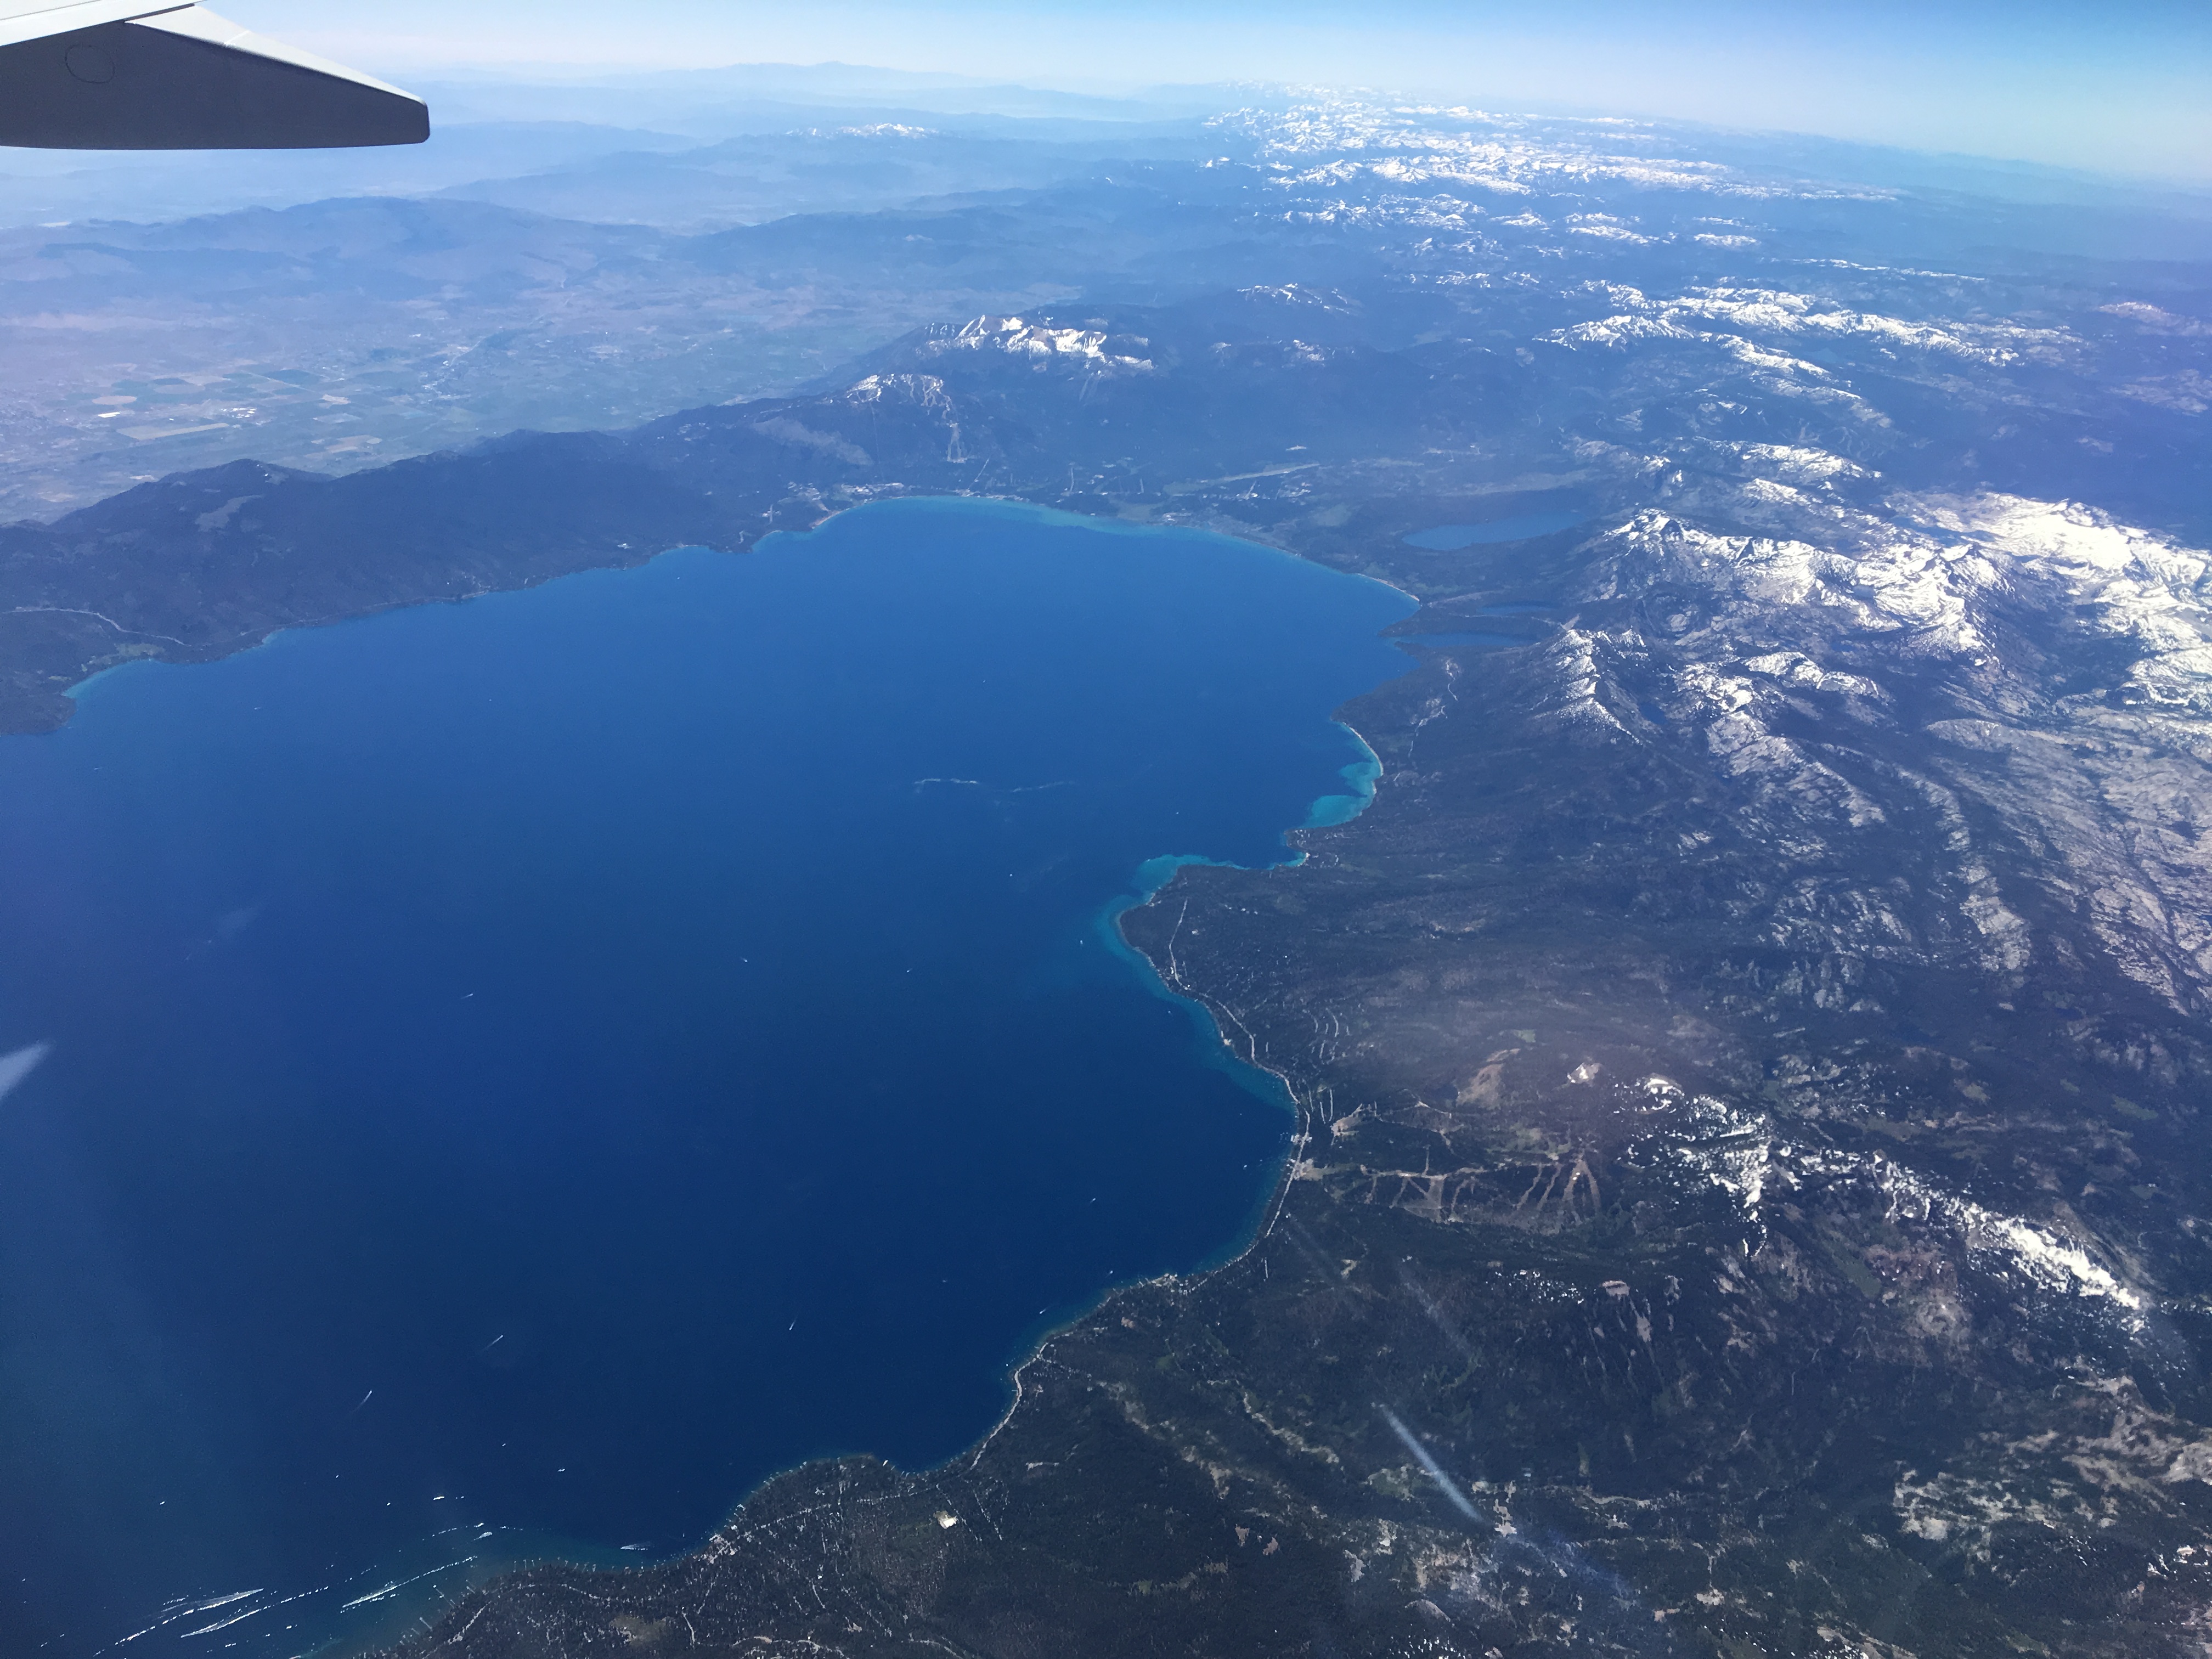 Lake Tahoe from an airplane